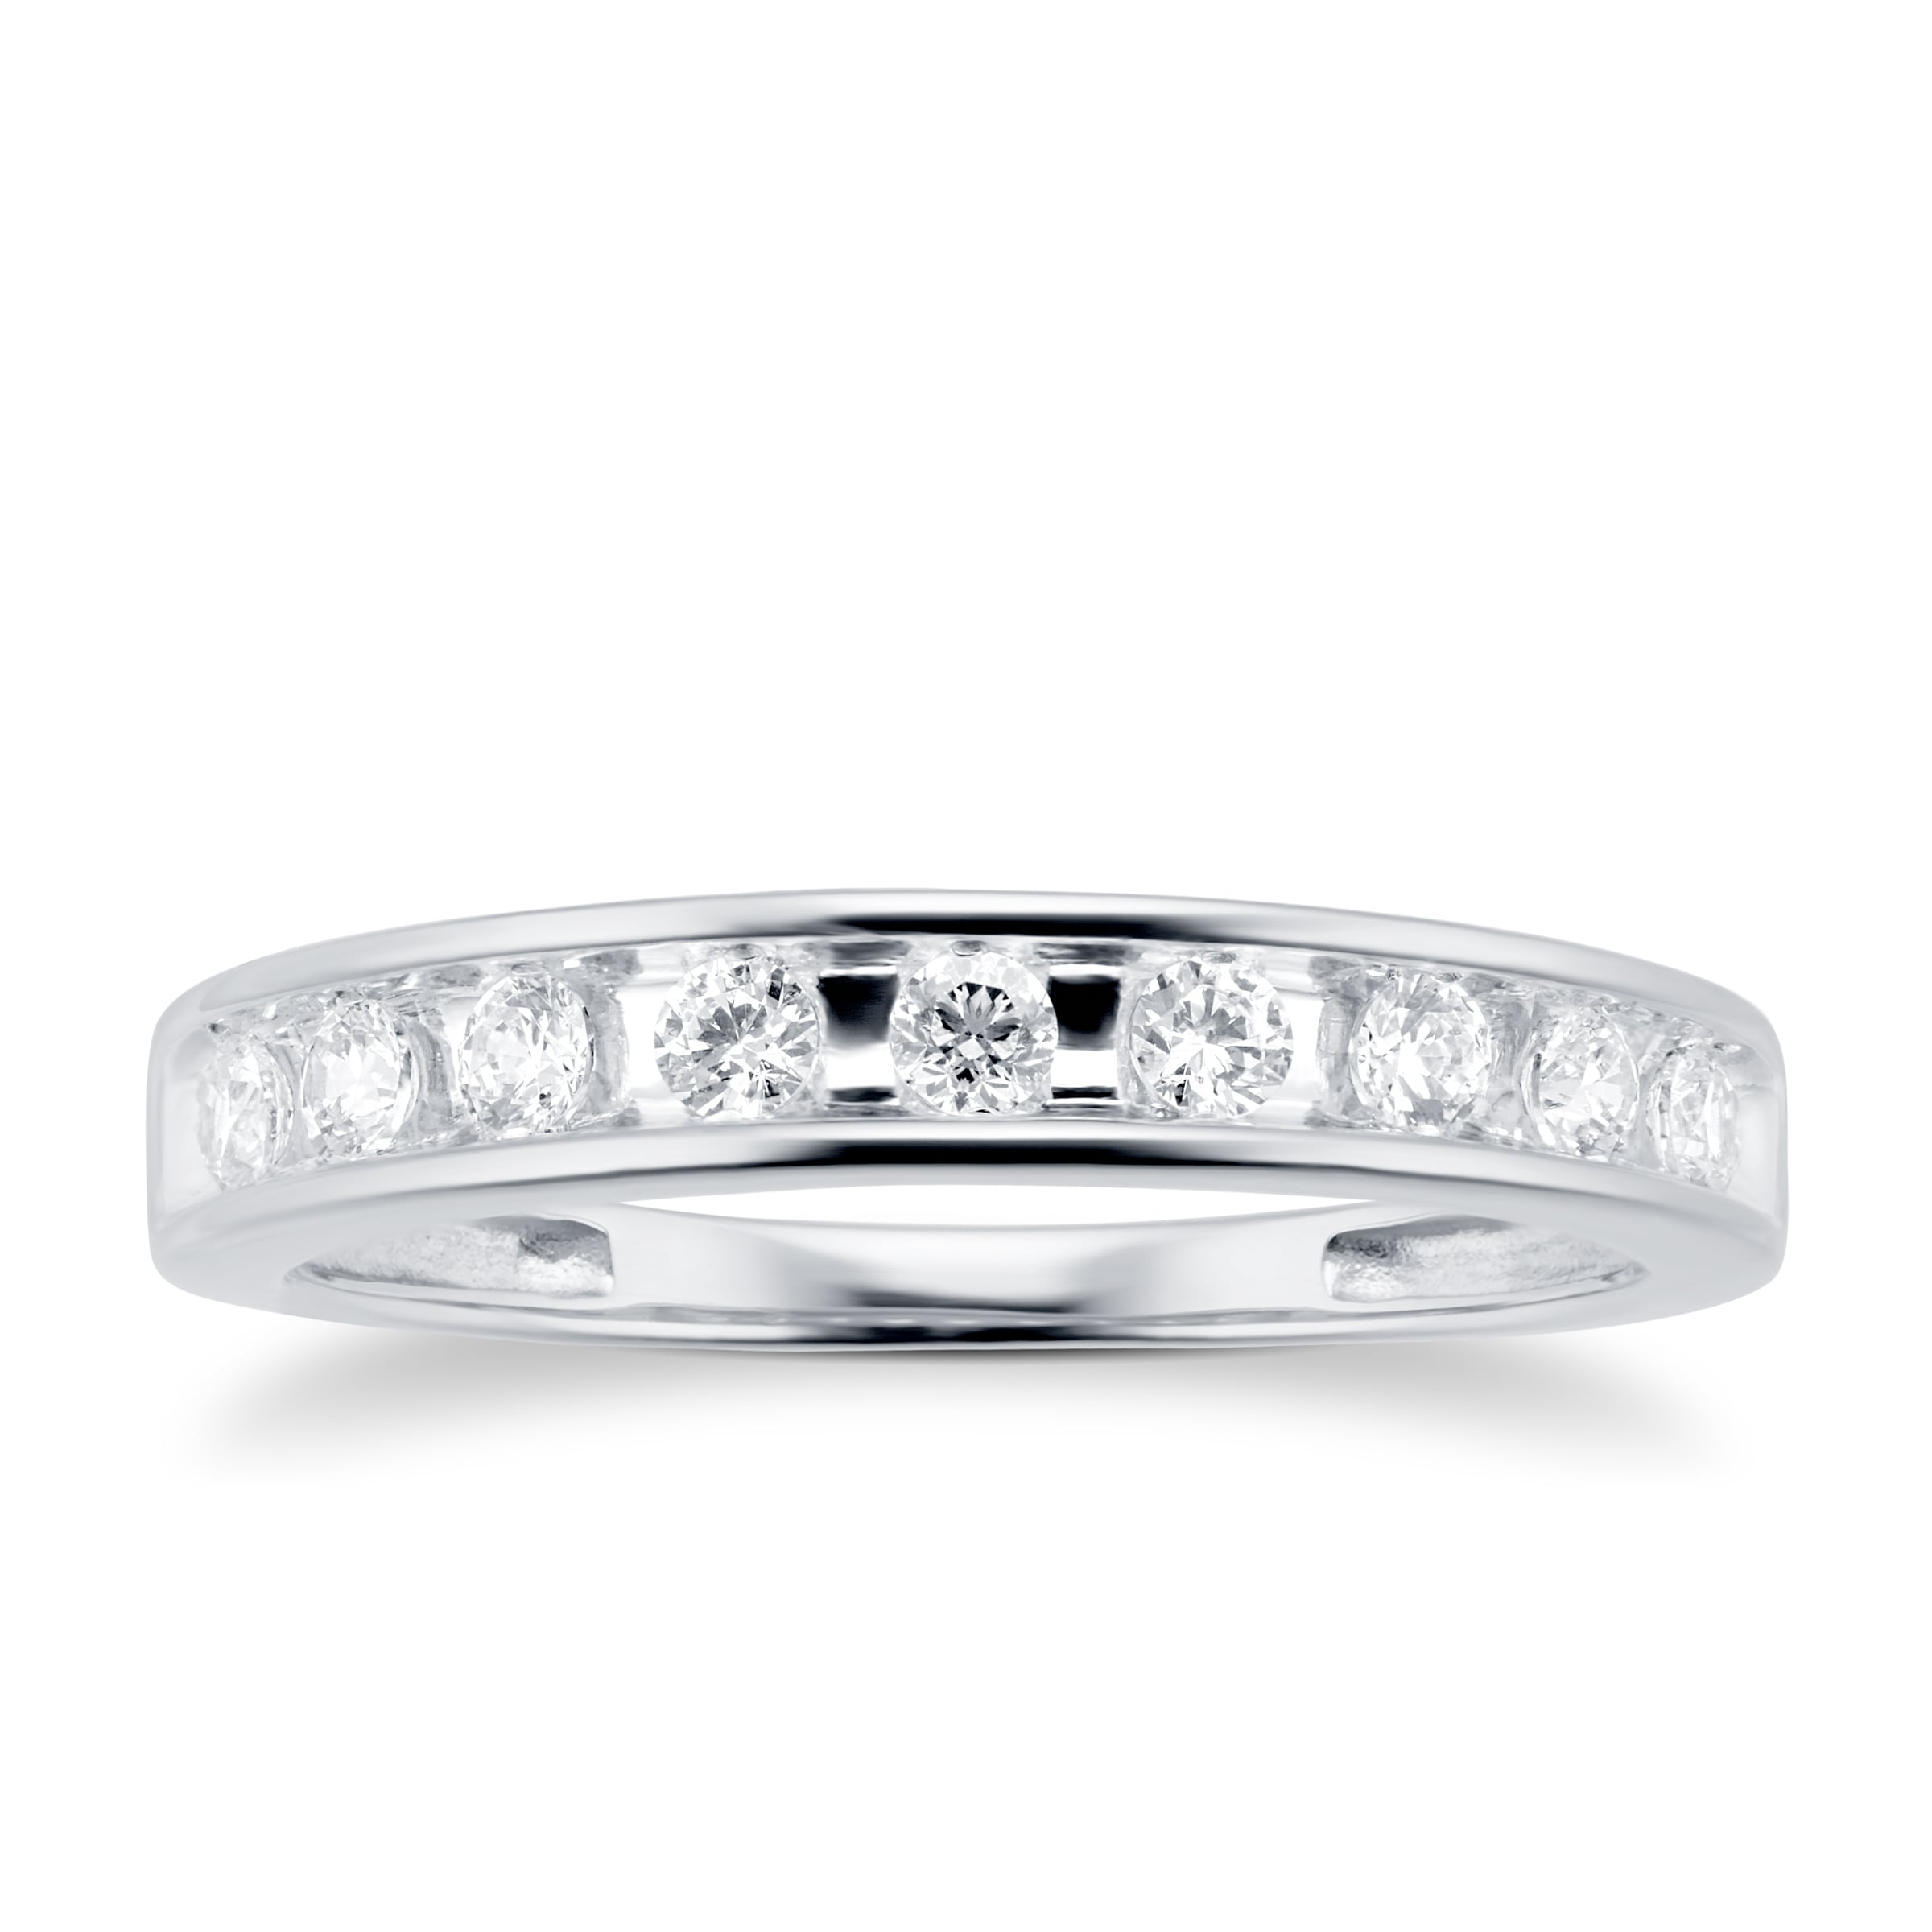 18ct White Gold 0.30cttw Diamond Channel Set Eternity Ring